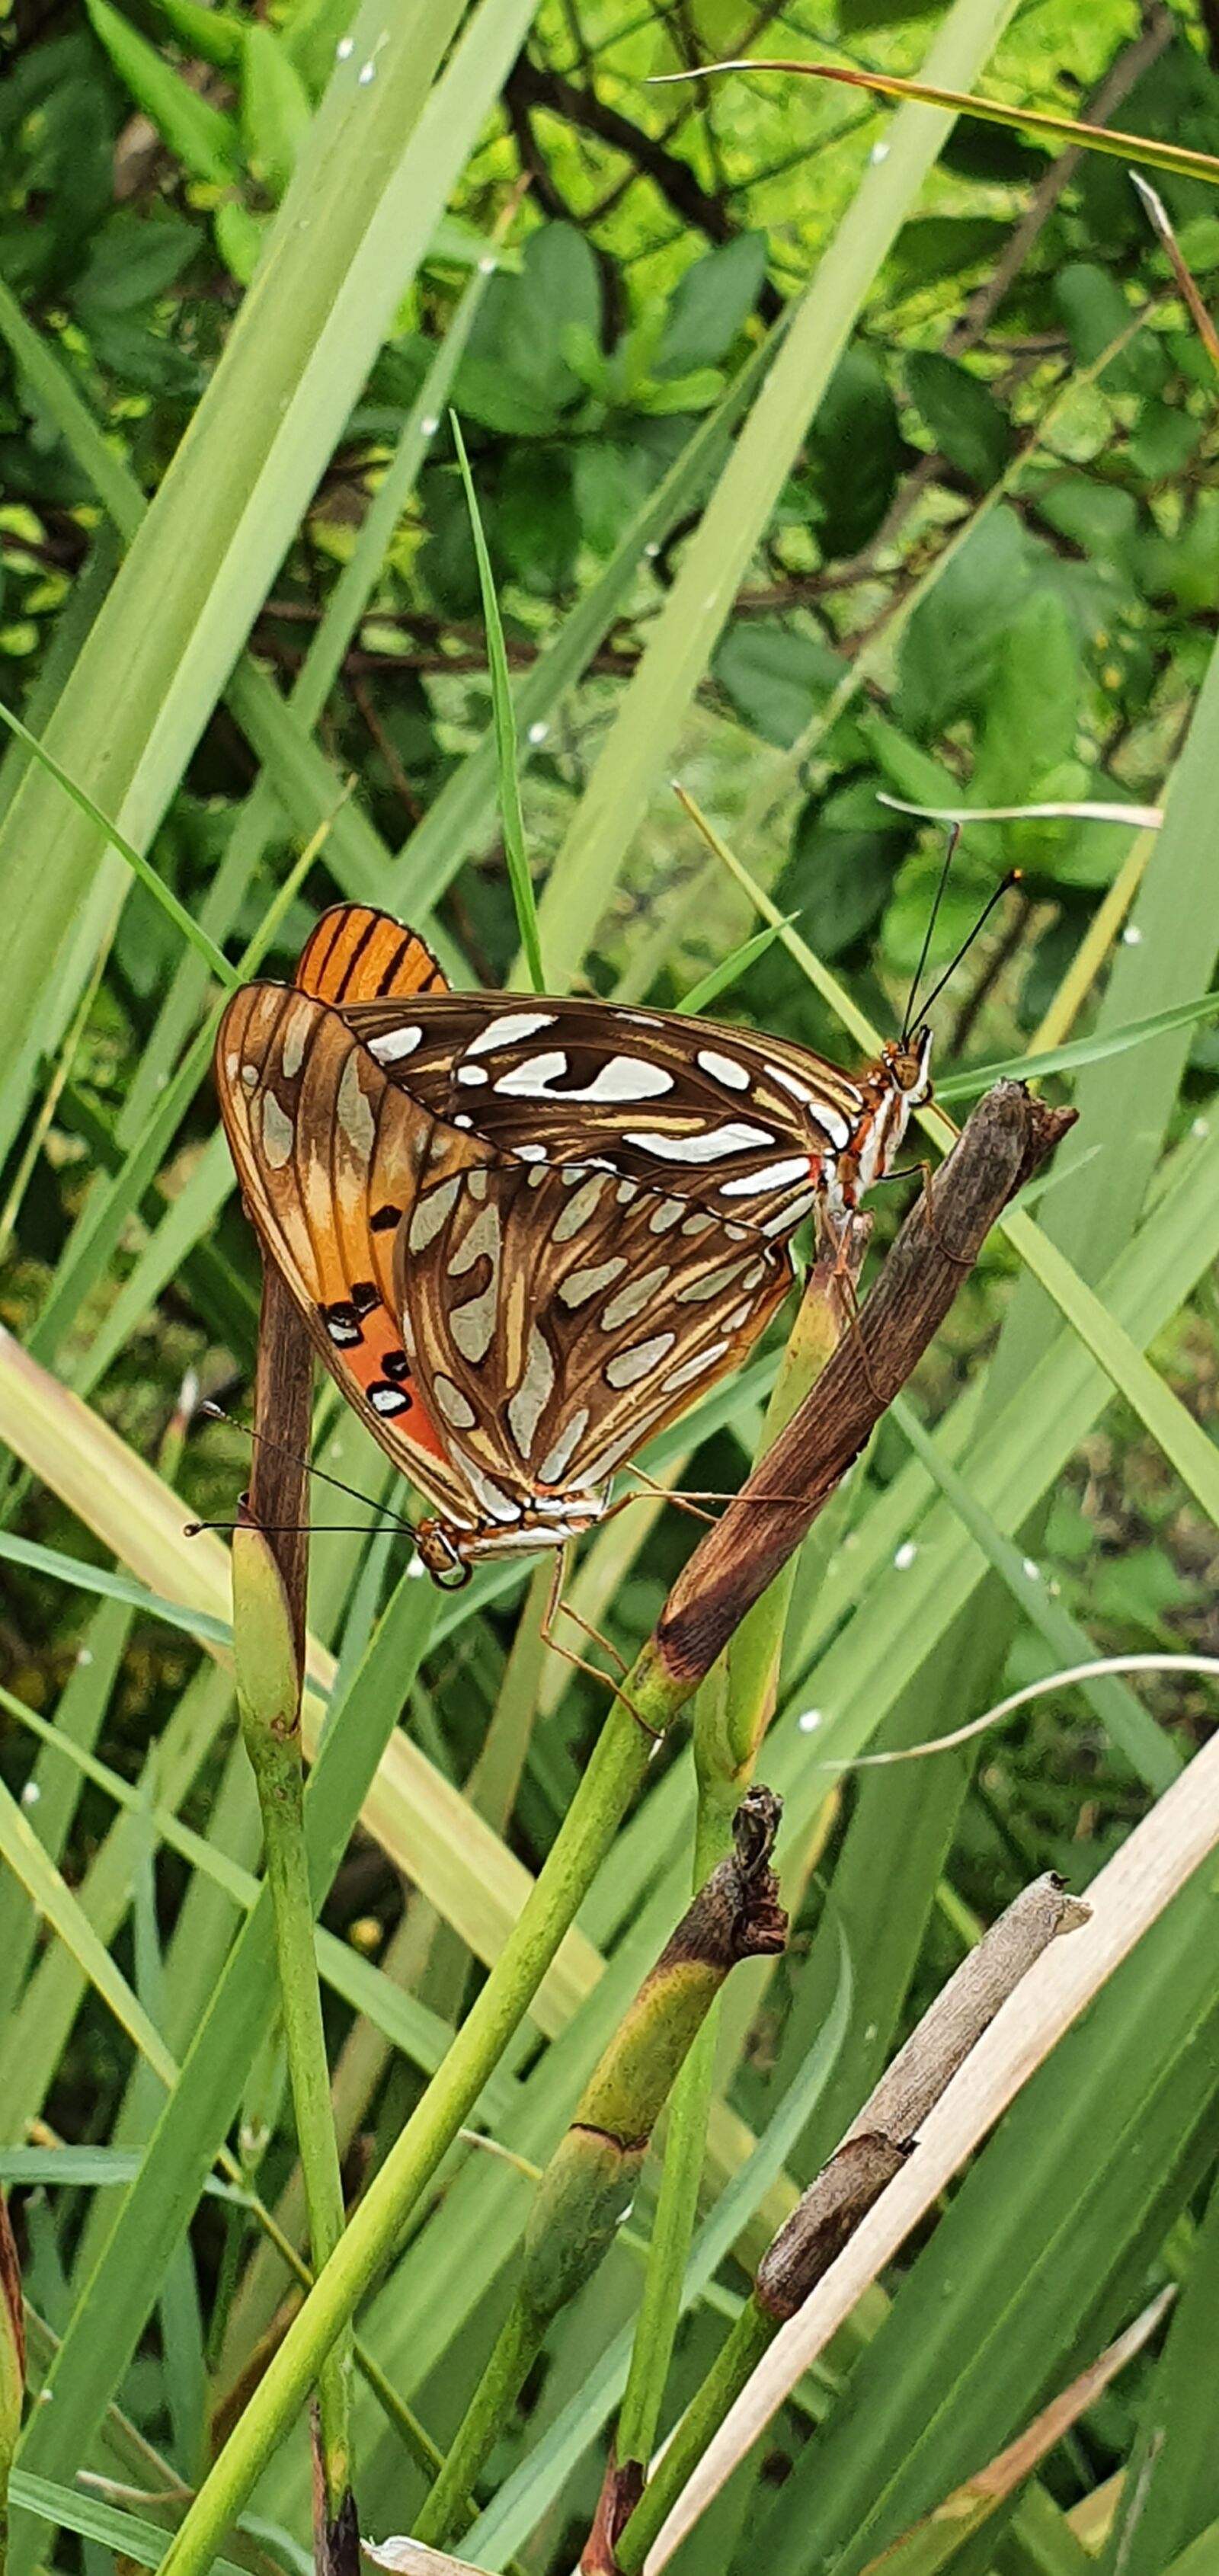 Samsung Galaxy S10 sample photo. Butterflies, reproduction, nature photography